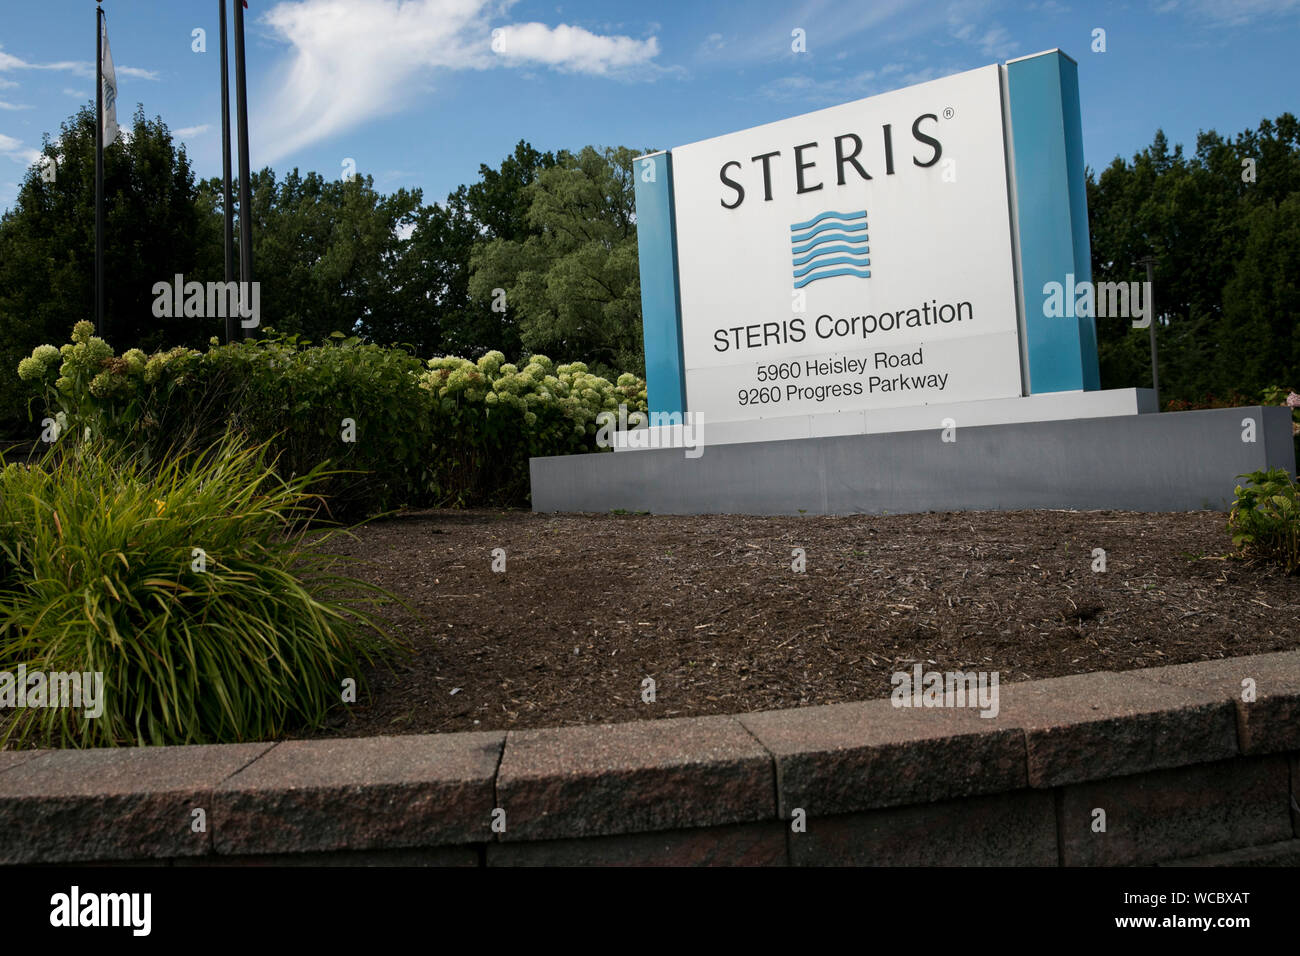 logo sign outside of facility occupied by the Steris Corporation in Mentor, Ohio August 11, 2019 Stock Photo - Alamy